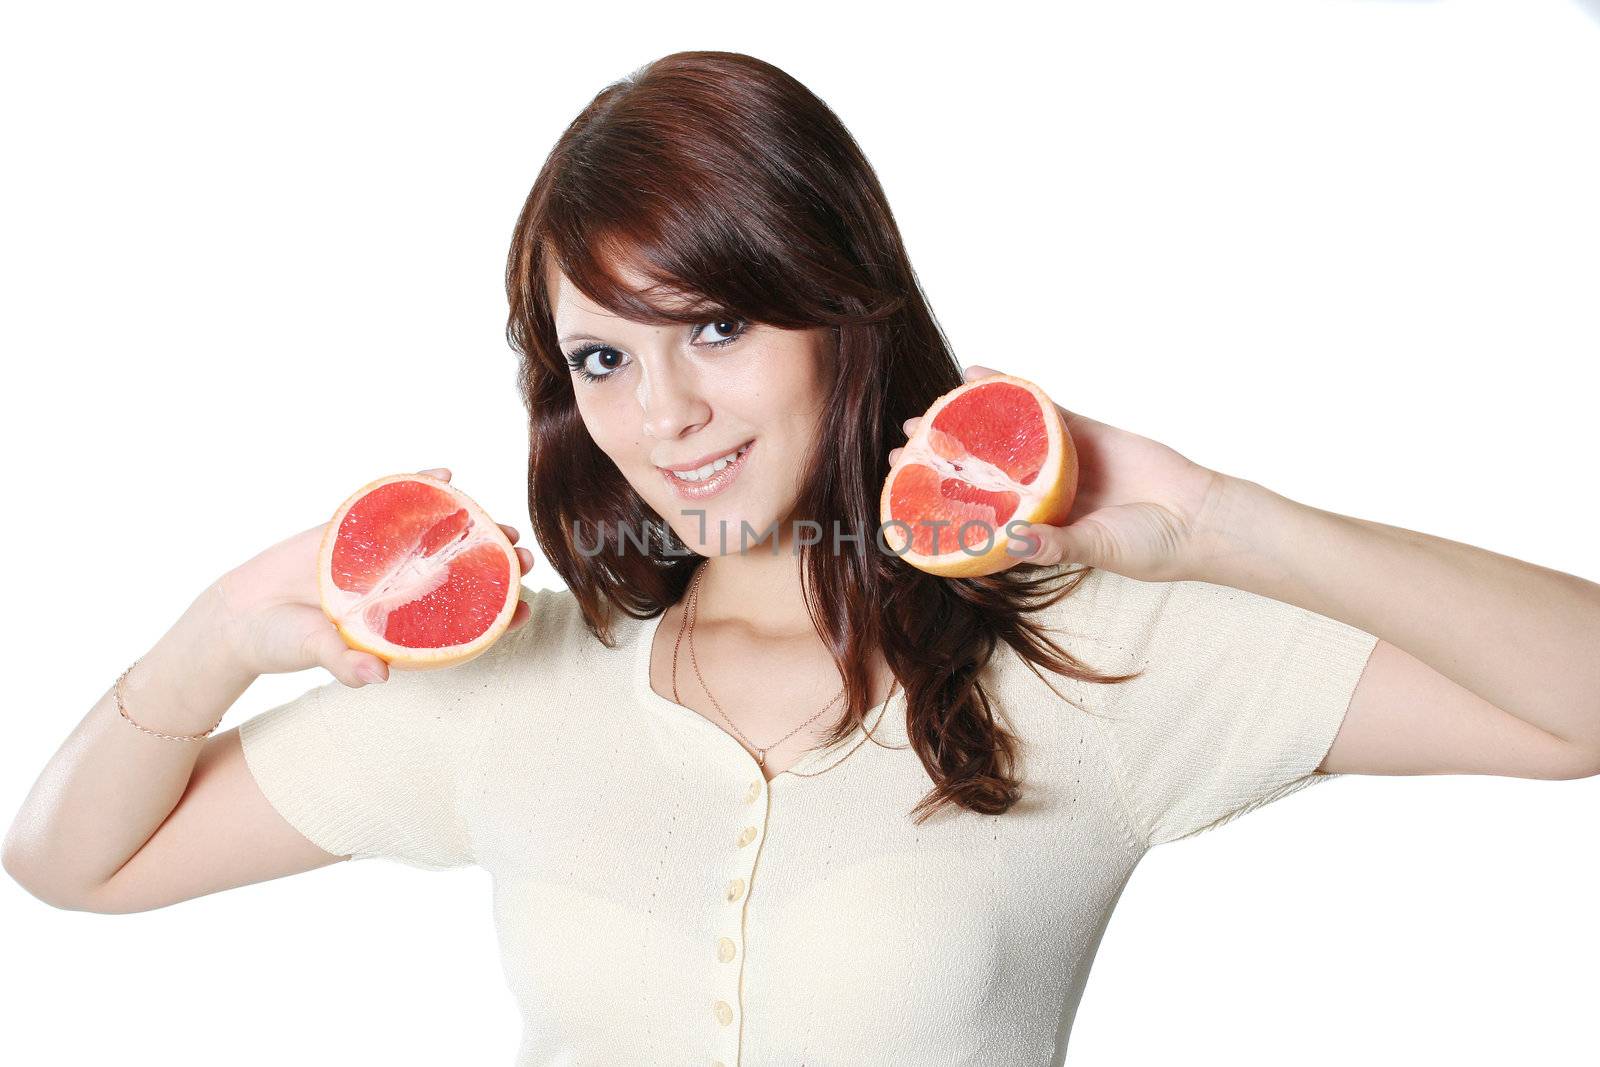 women young person fruit freshness healthcare dieting